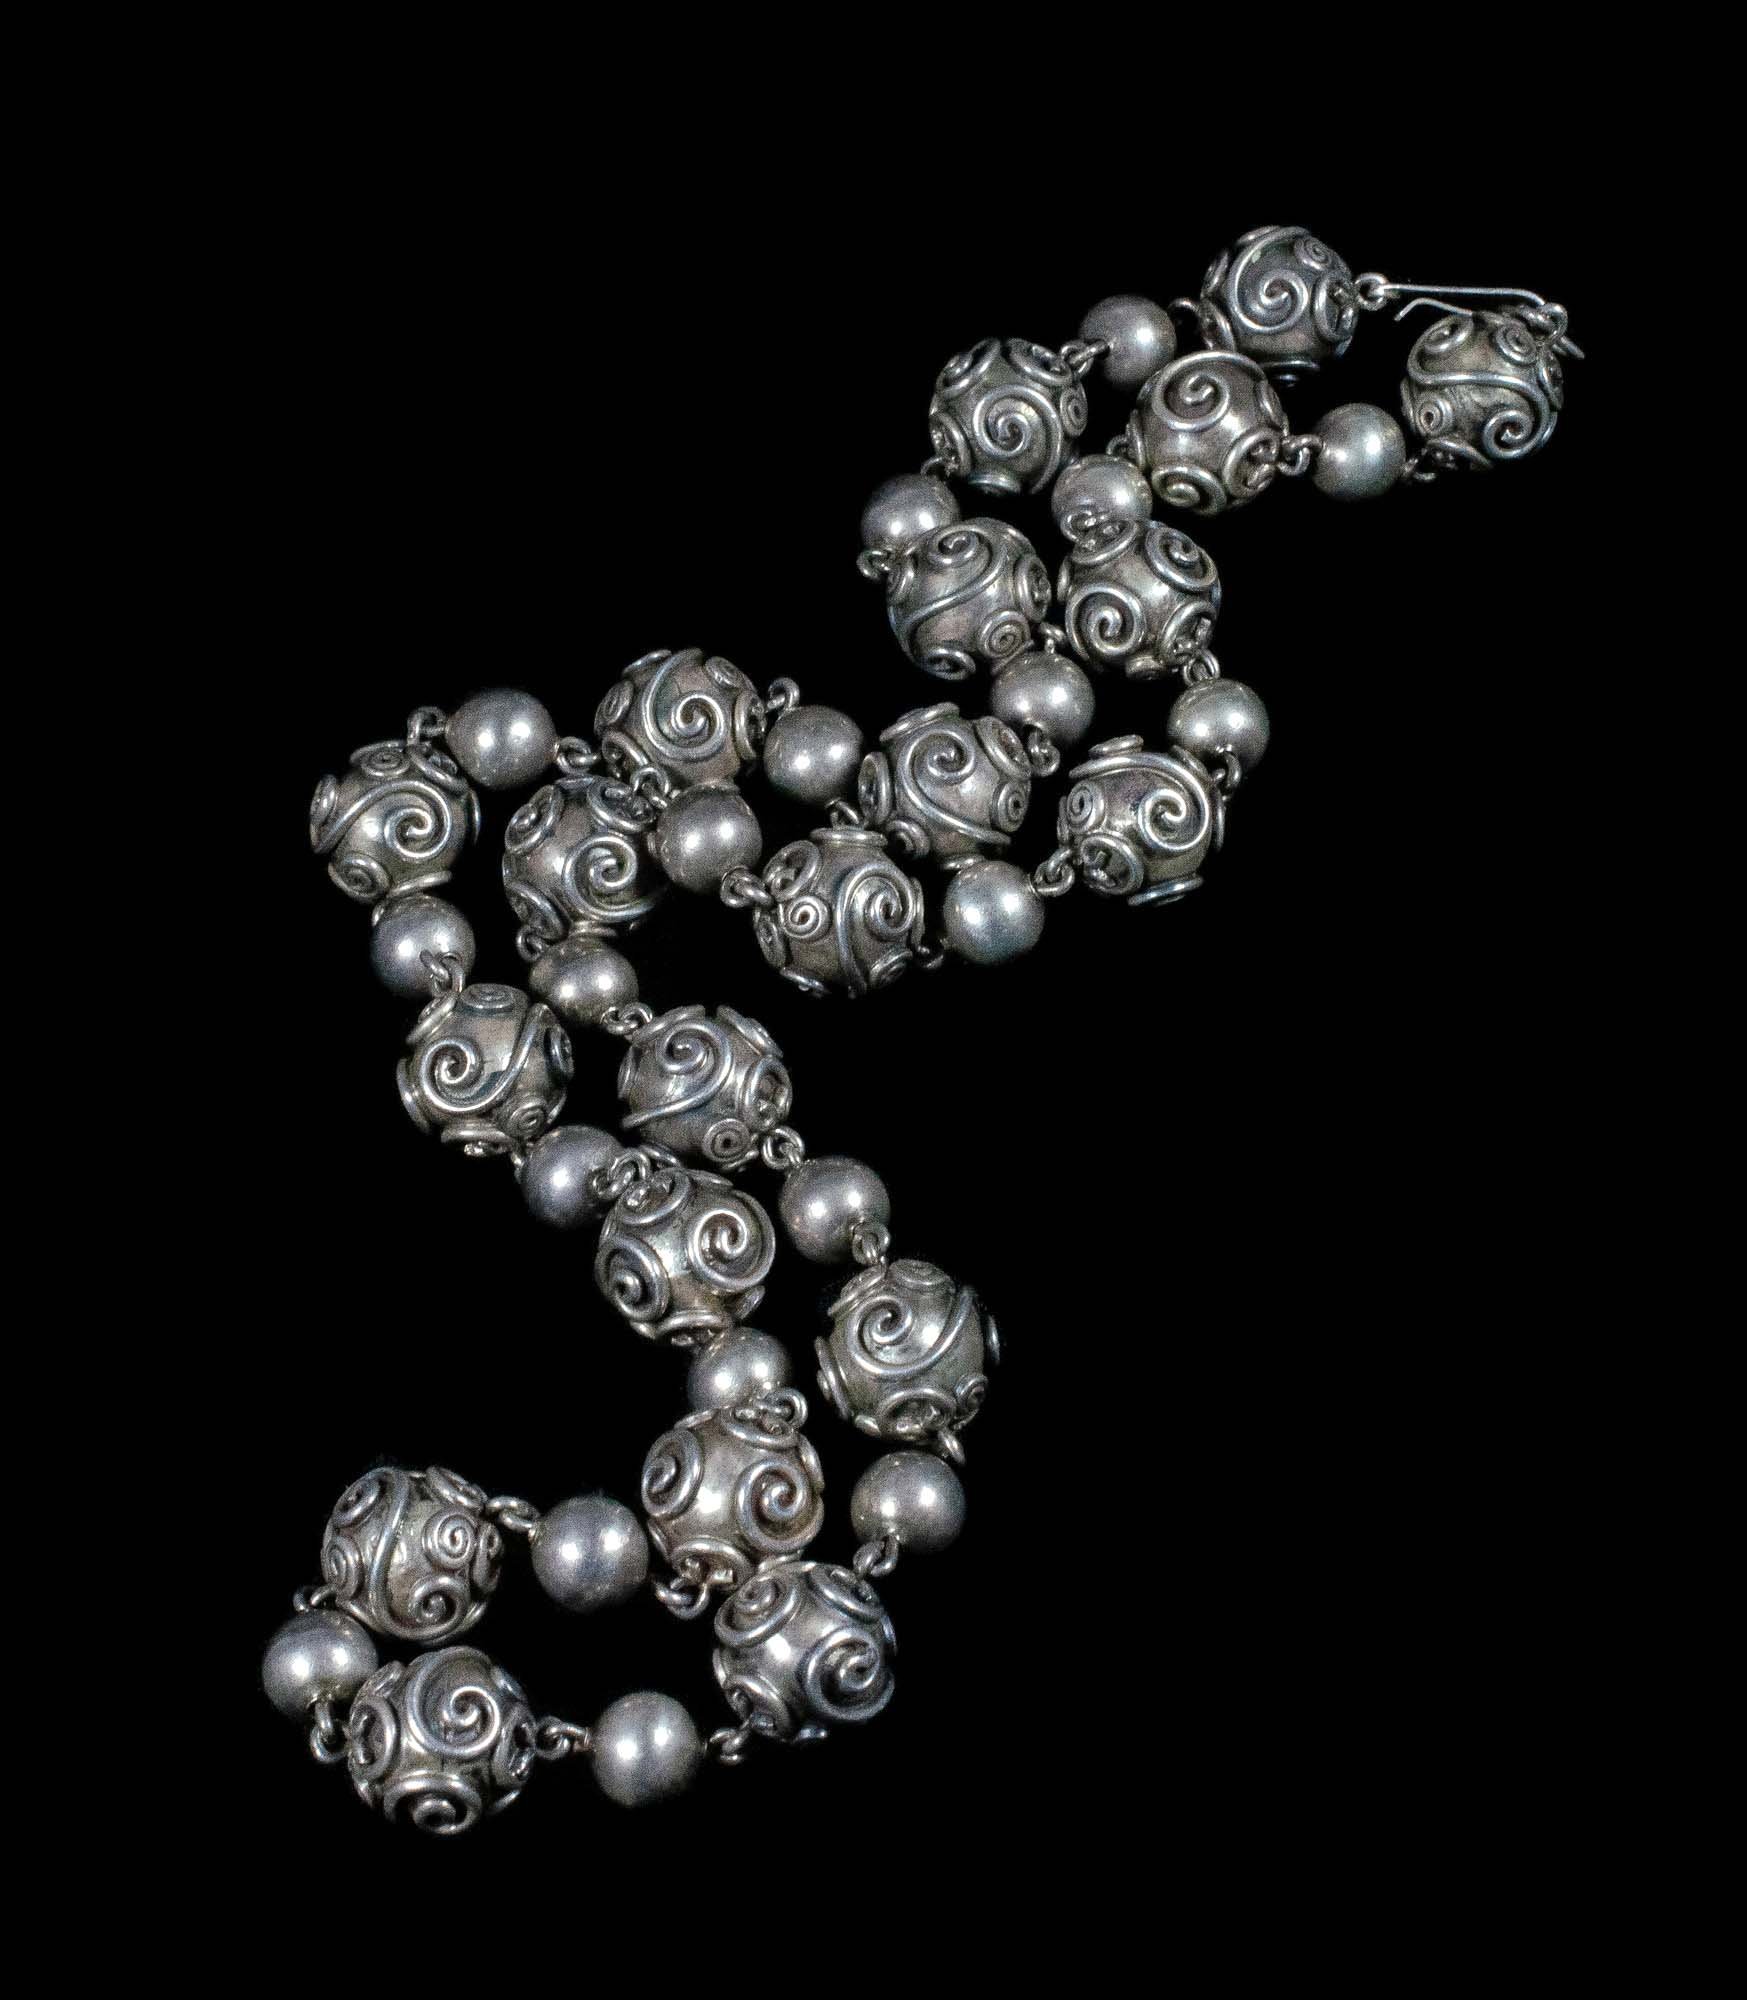 25" Carmen Beckmann Mexican silver Necklace ~ beads with wirework